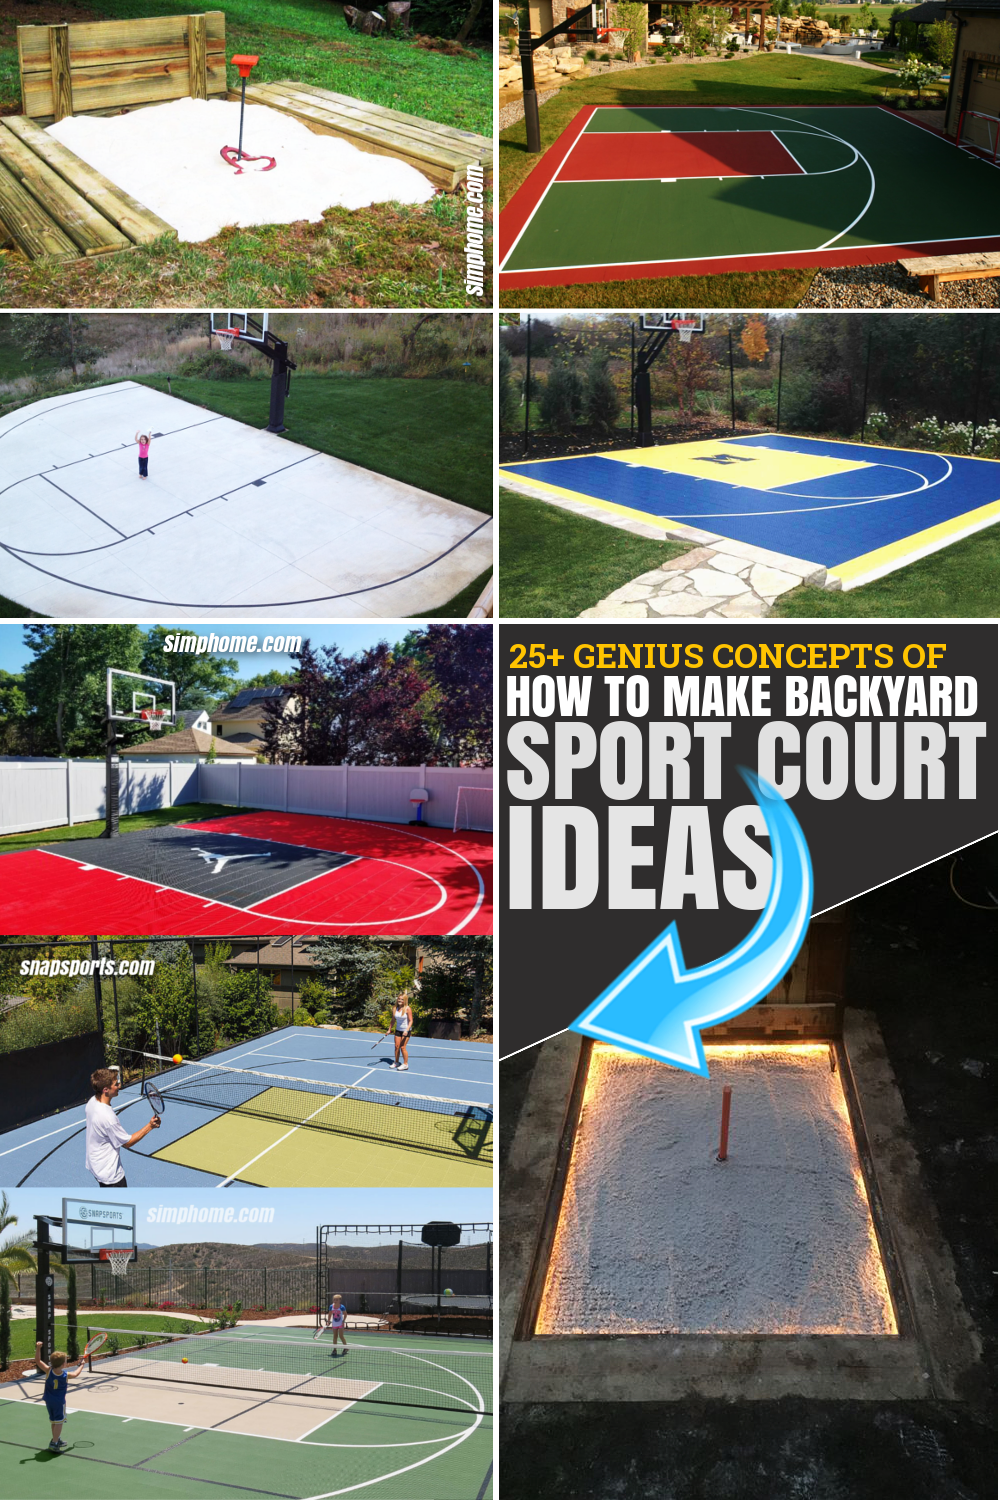 SIMPHOME.COM 30 Genius Concepts of How to Make Backyard Sport Court Ideas Featured Pinterest Image